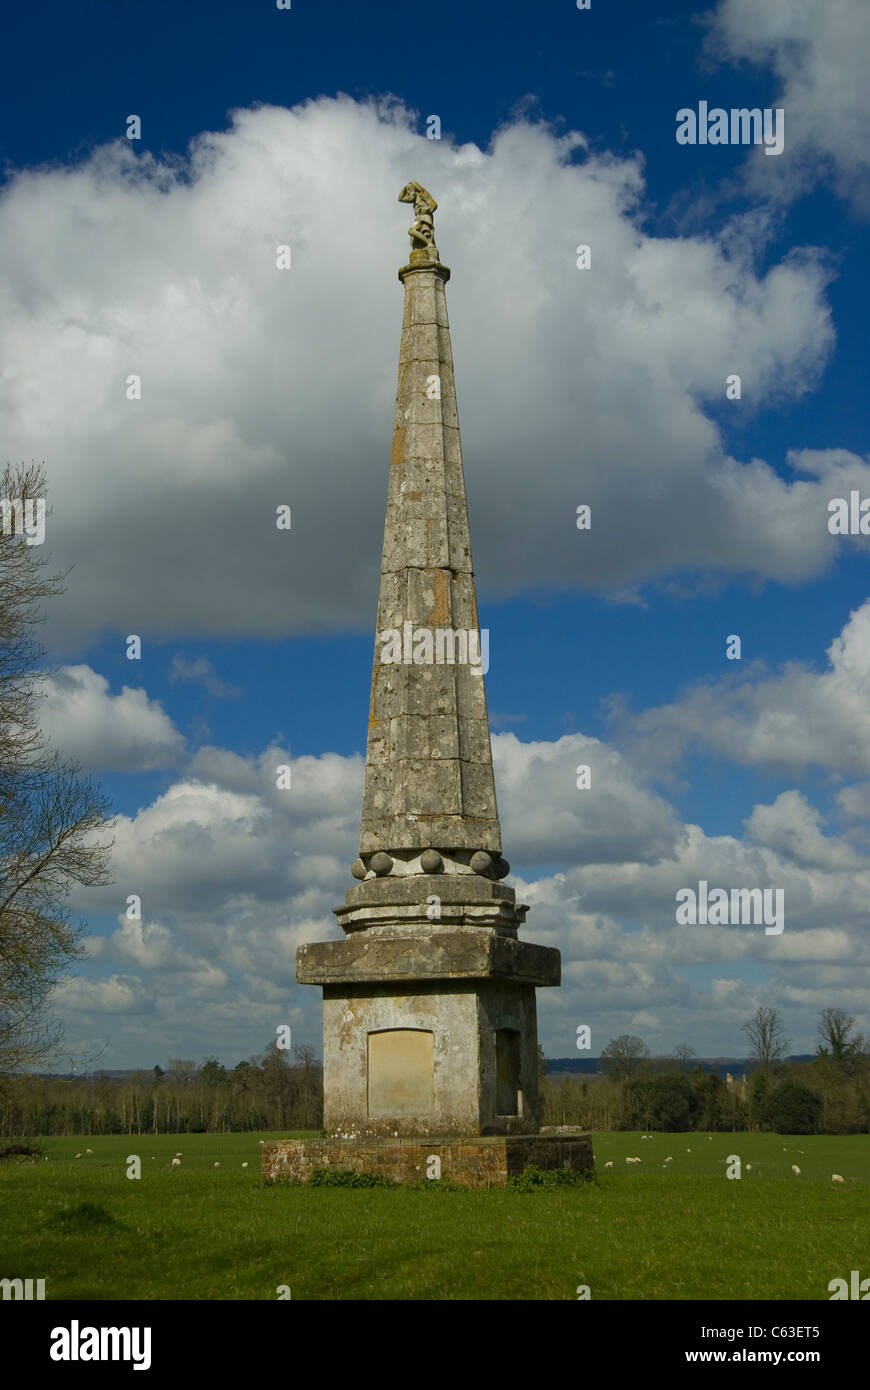 Monument at Old renaissance period house in berkshire, england near Henley-on-Thames Stock Photo